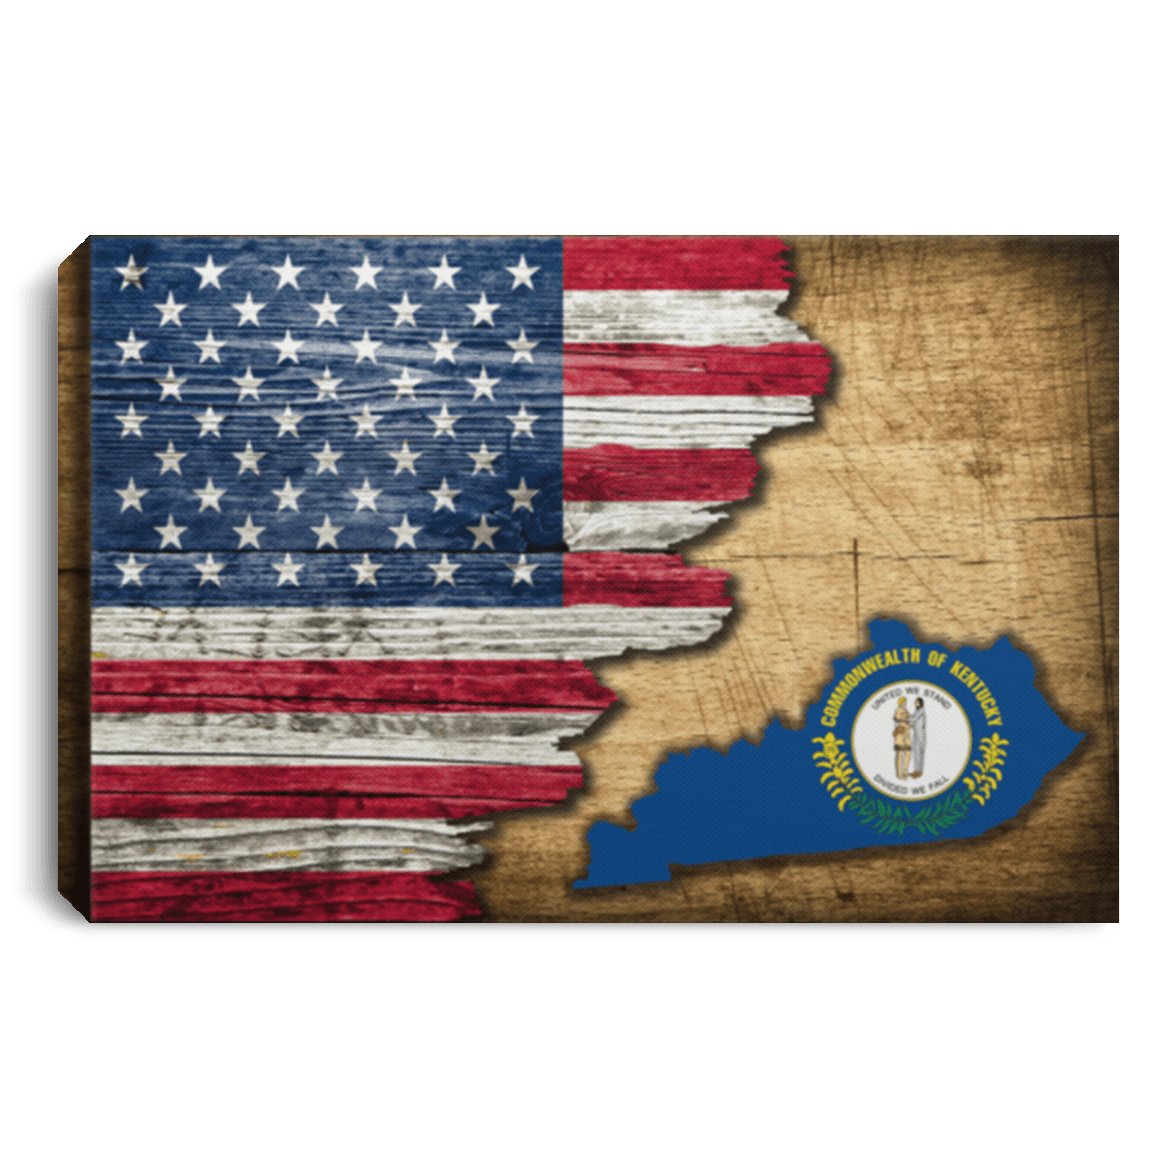 United States/Kentucky Flag Ripped Effect 12X8 Inches Landscape Canvas .75In Frame